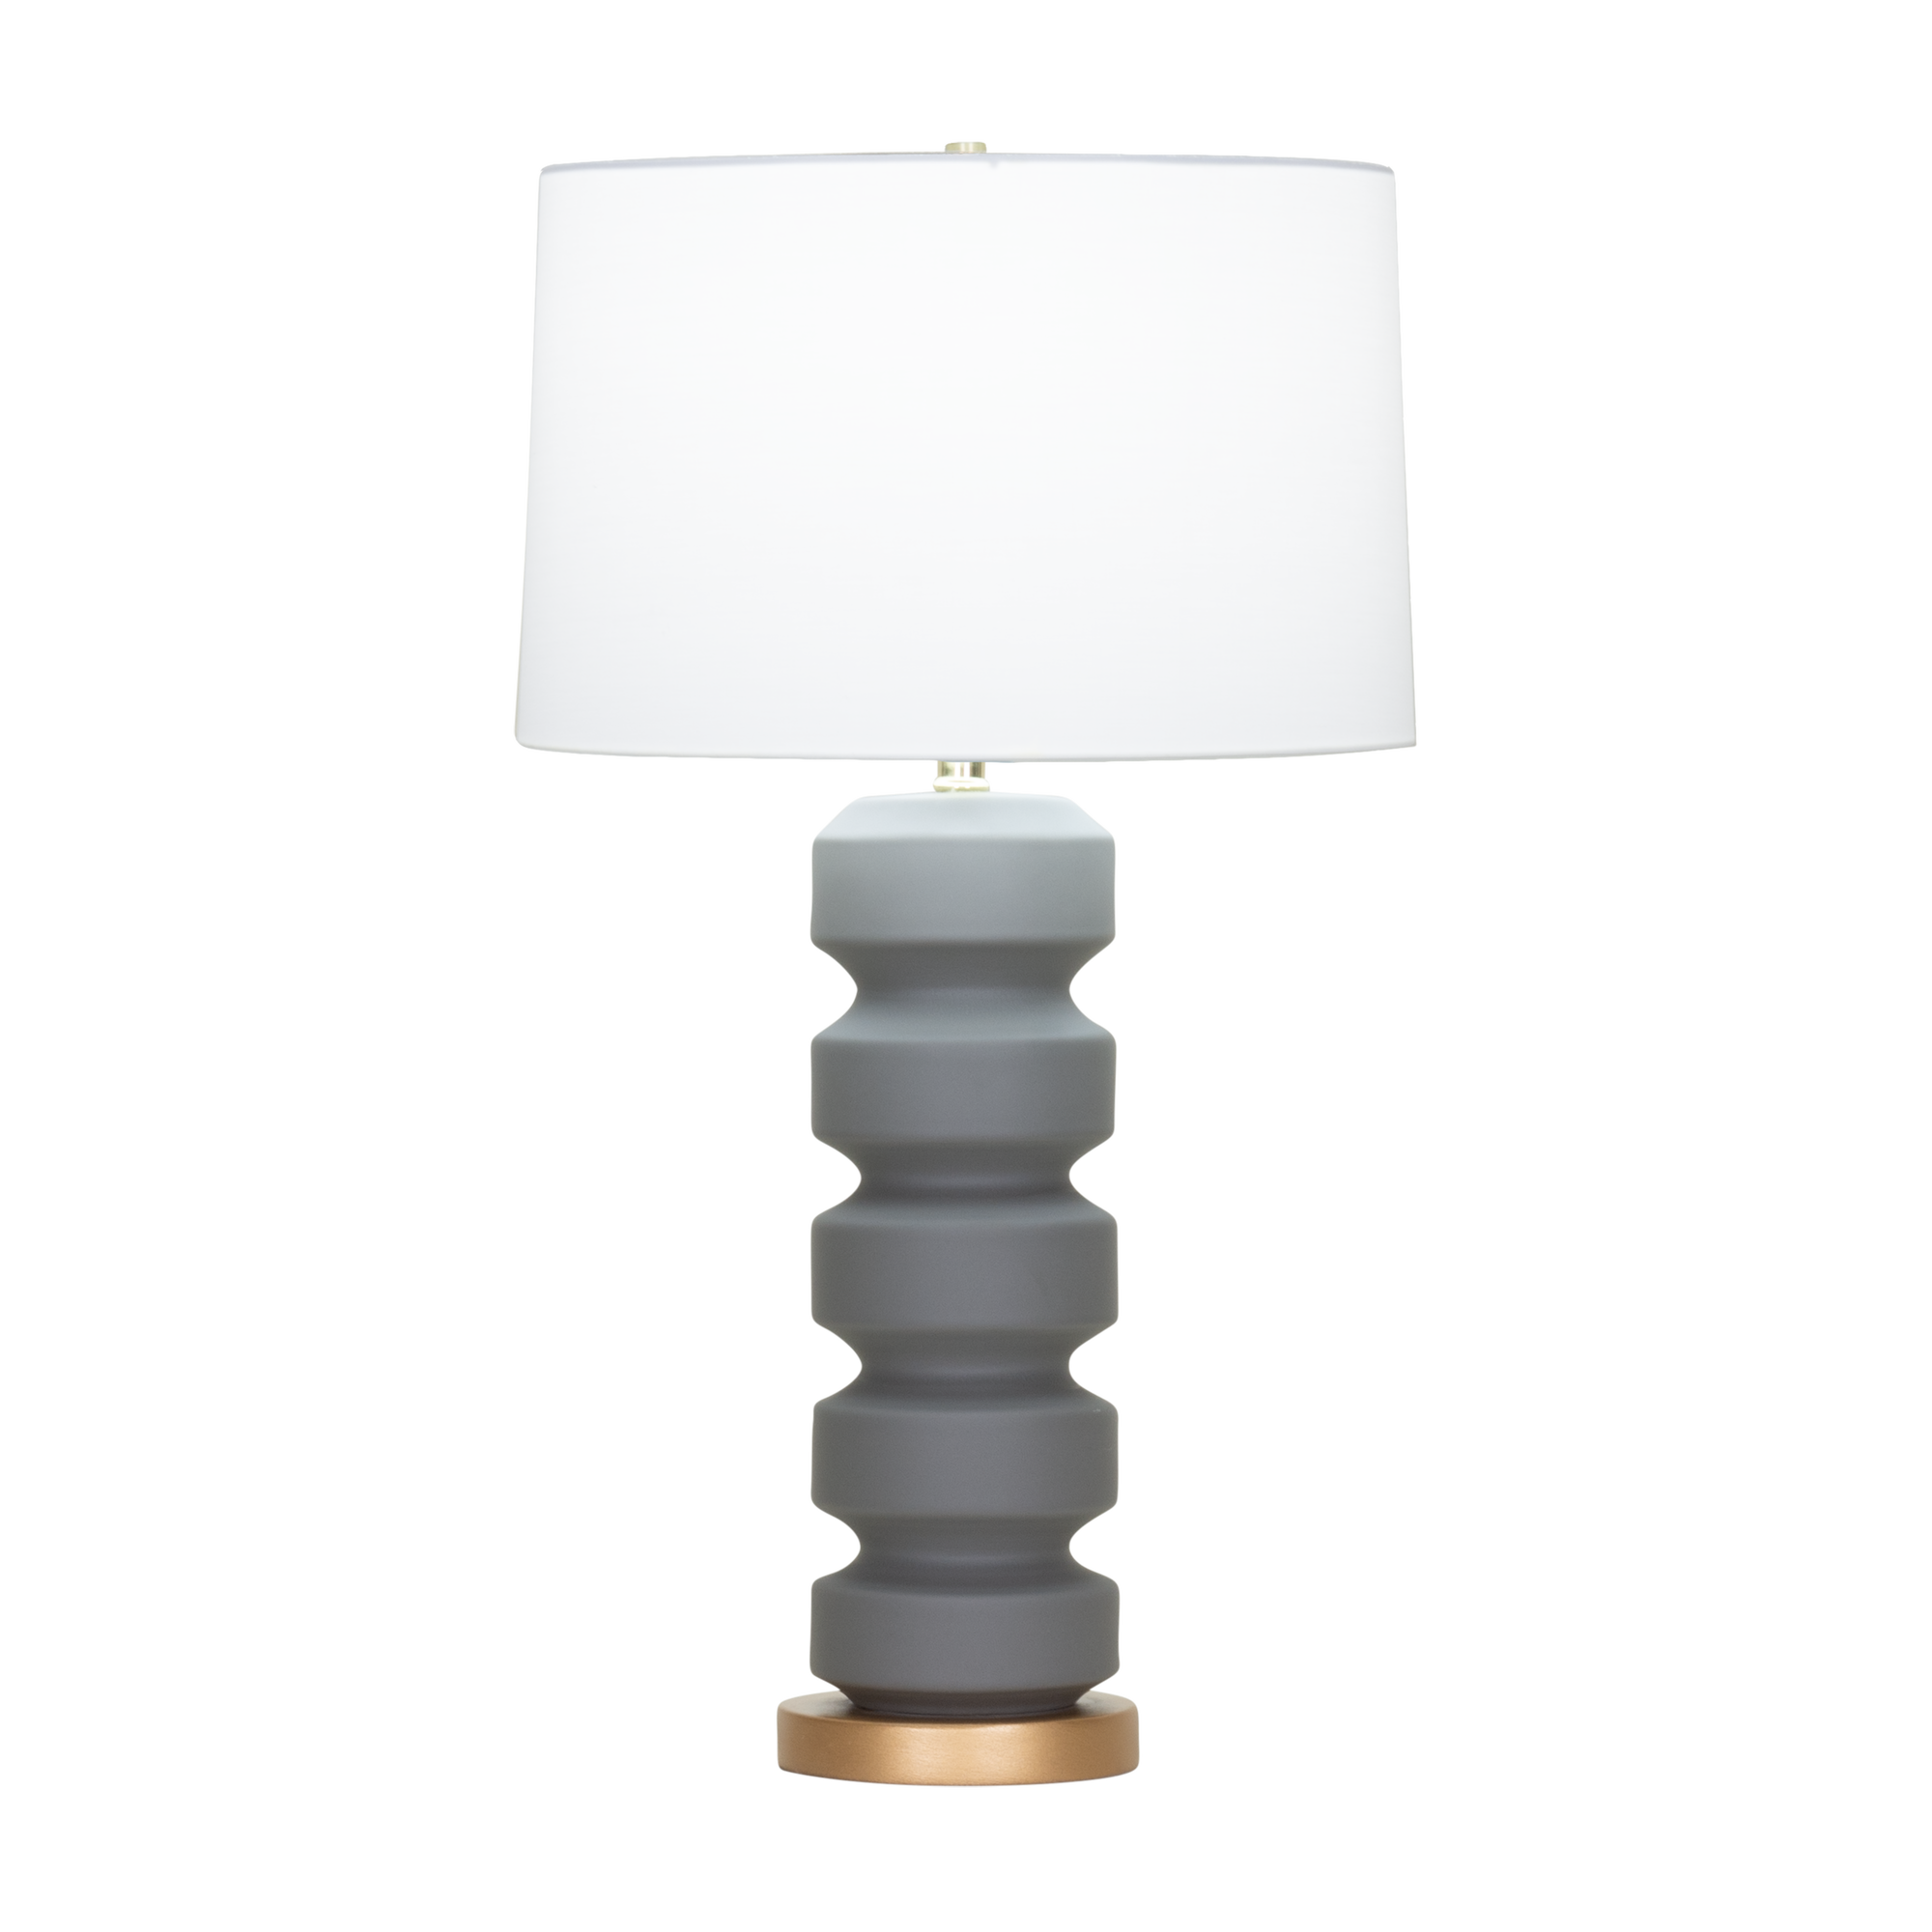 Finished in a matte charcoal grey, our Quarrel Table Lamp features a slim ceramic column with a geometric form for a refined take on industrial design.